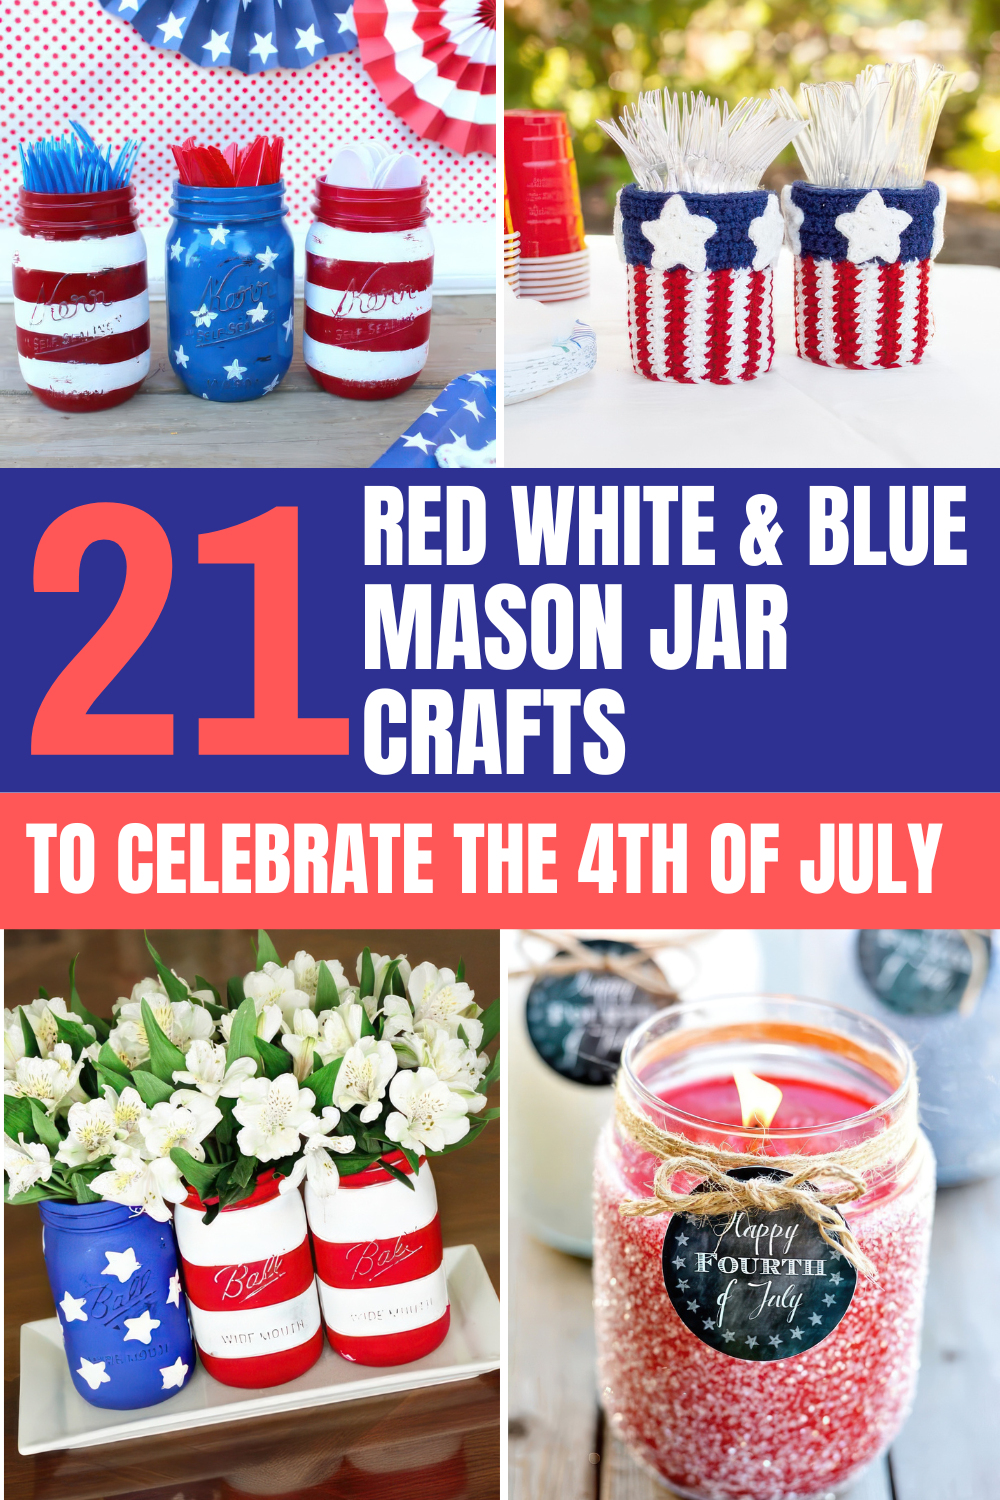 dd a touch of elegance to your 4th of July with these chic mason jar crafts! From sophisticated candle holders to stylish centerpieces, these red, white, and blue projects are perfect for adult crafters. Tap to explore all the creative ideas! 🇺🇸🖌️🎉